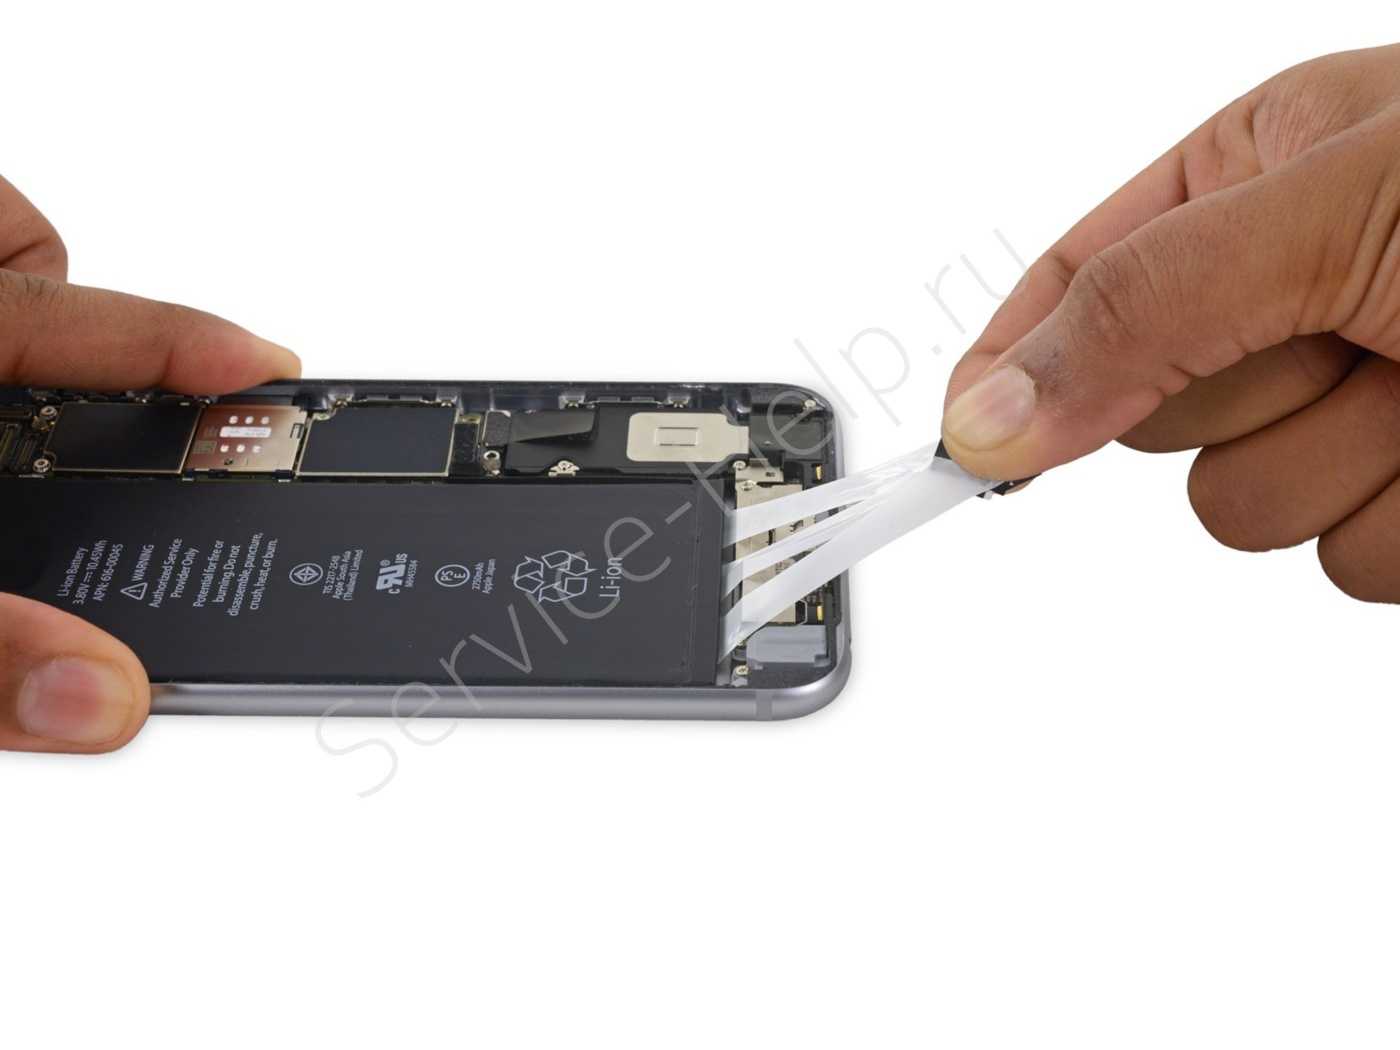 Replacement battery. Iphone 6s Plus Battery. Iphone 6 Plus Battery. Iphone 6s Battery Replacement. Замена АКБ iphone 6s.